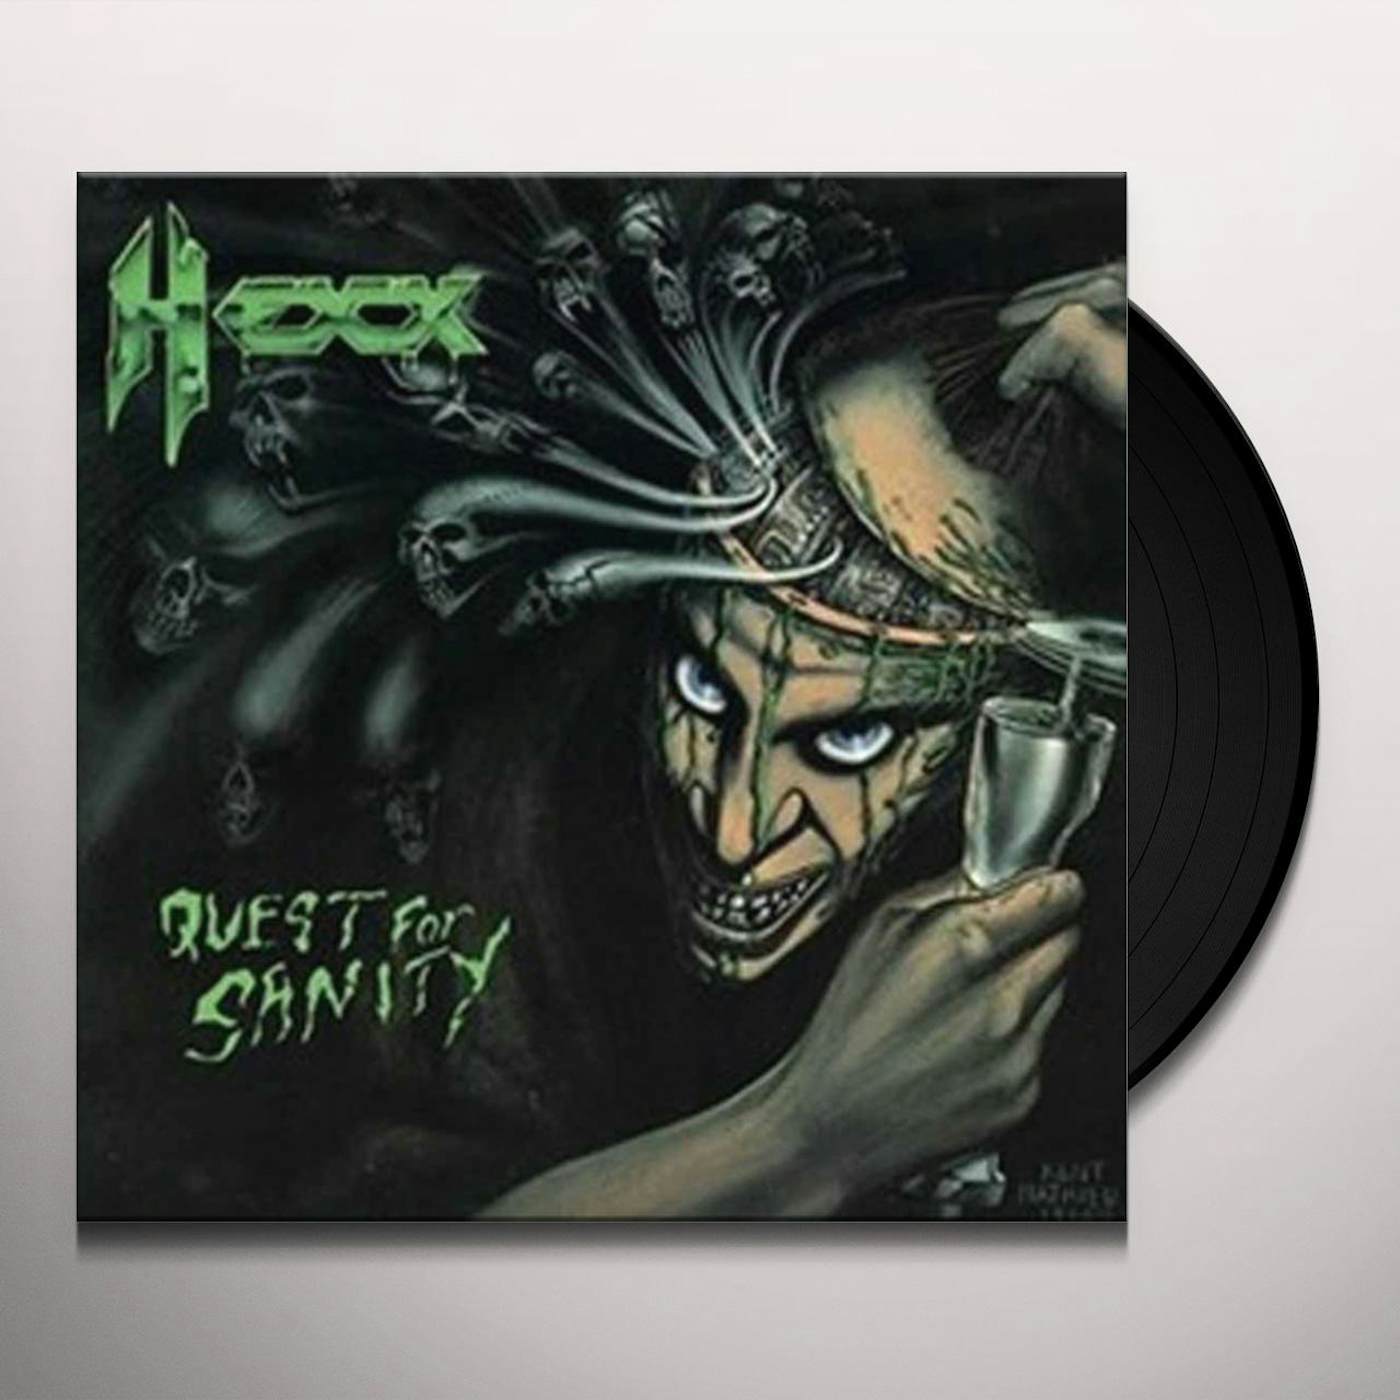 Hexx QUEST FOR SANITY & WATERY GRAVES Vinyl Record